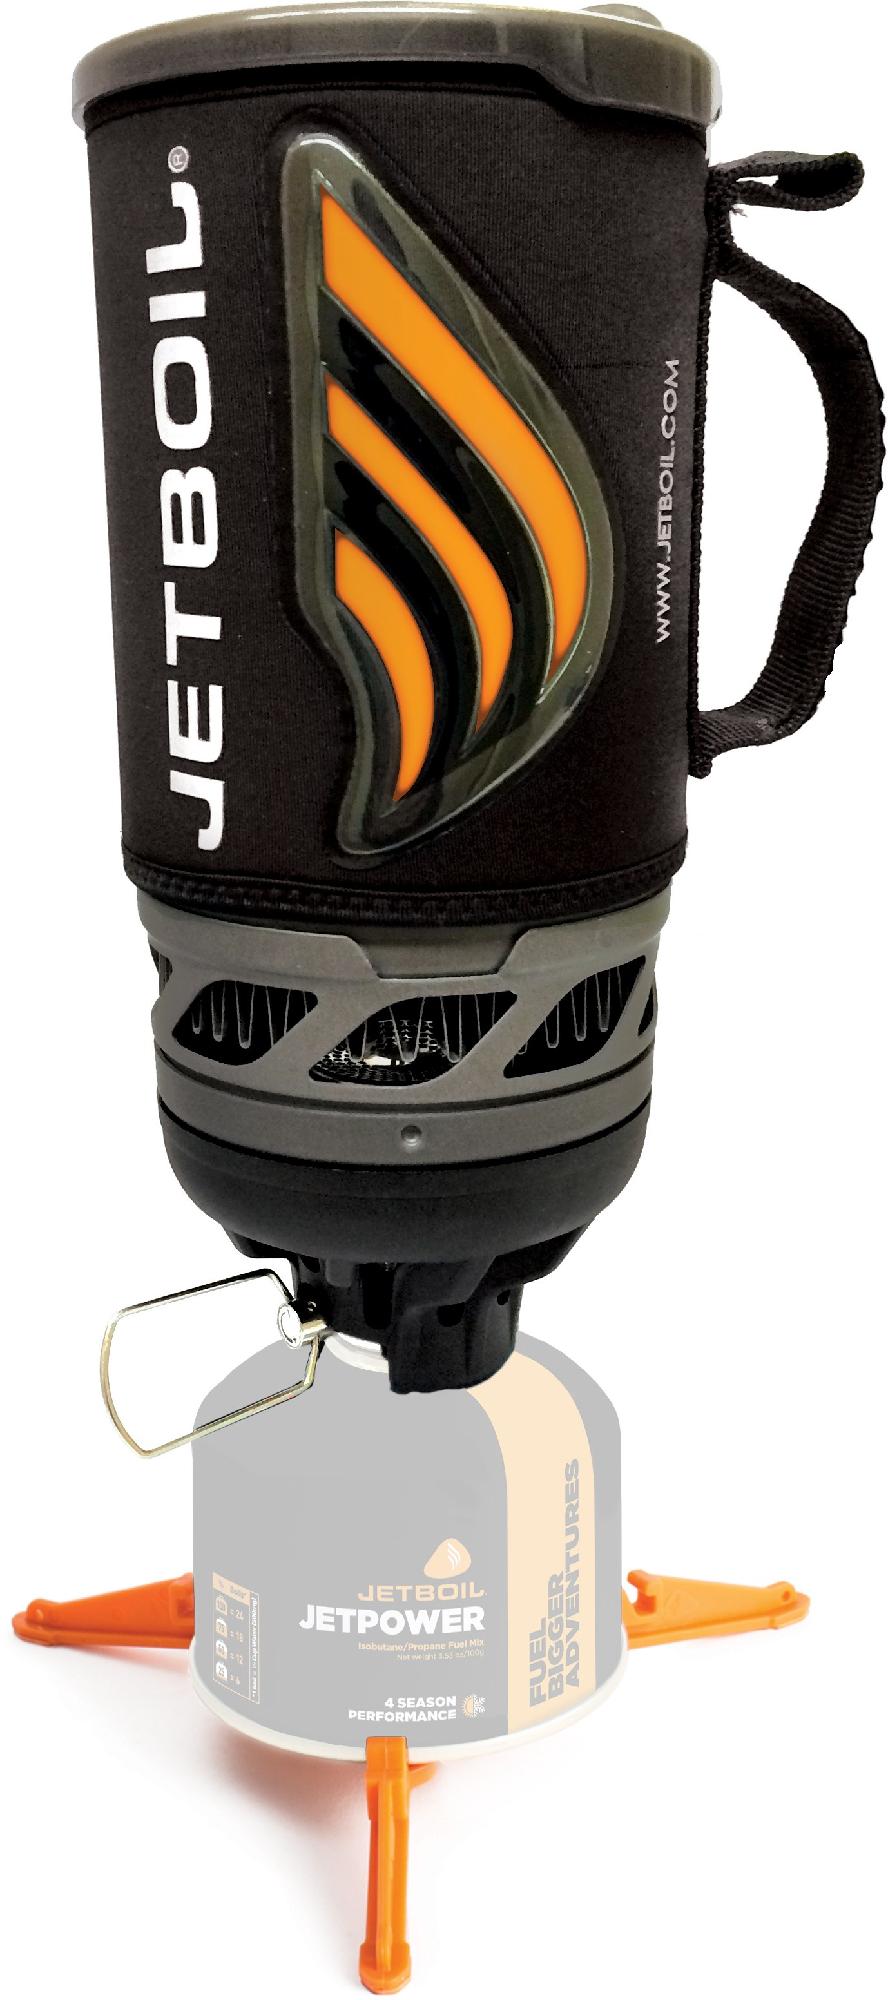 Jetboil Flash cooking system